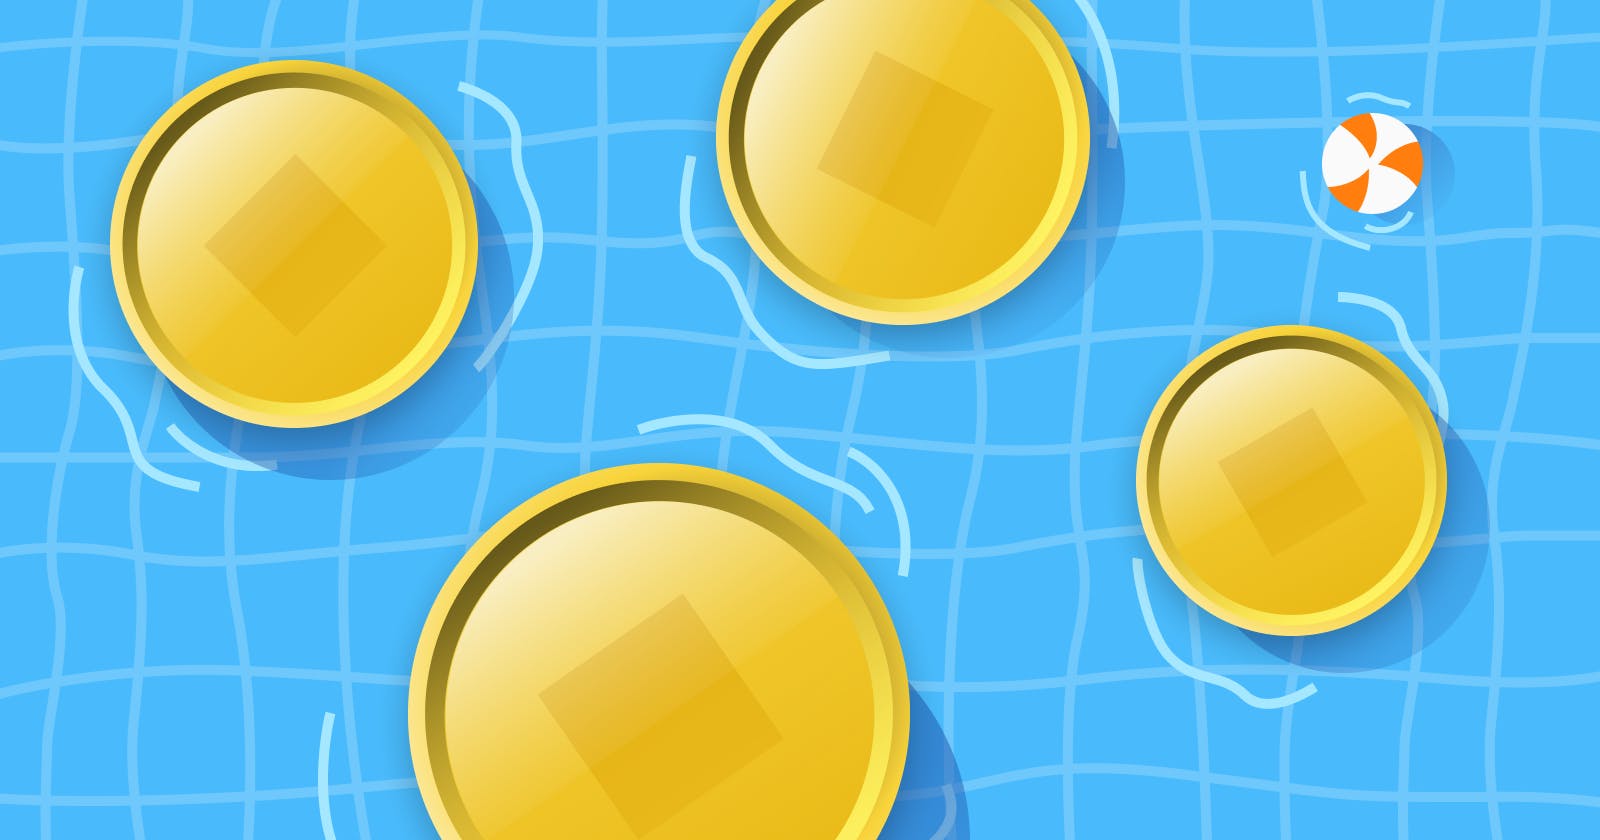 What Are Liquidity Pool (LP) Tokens?